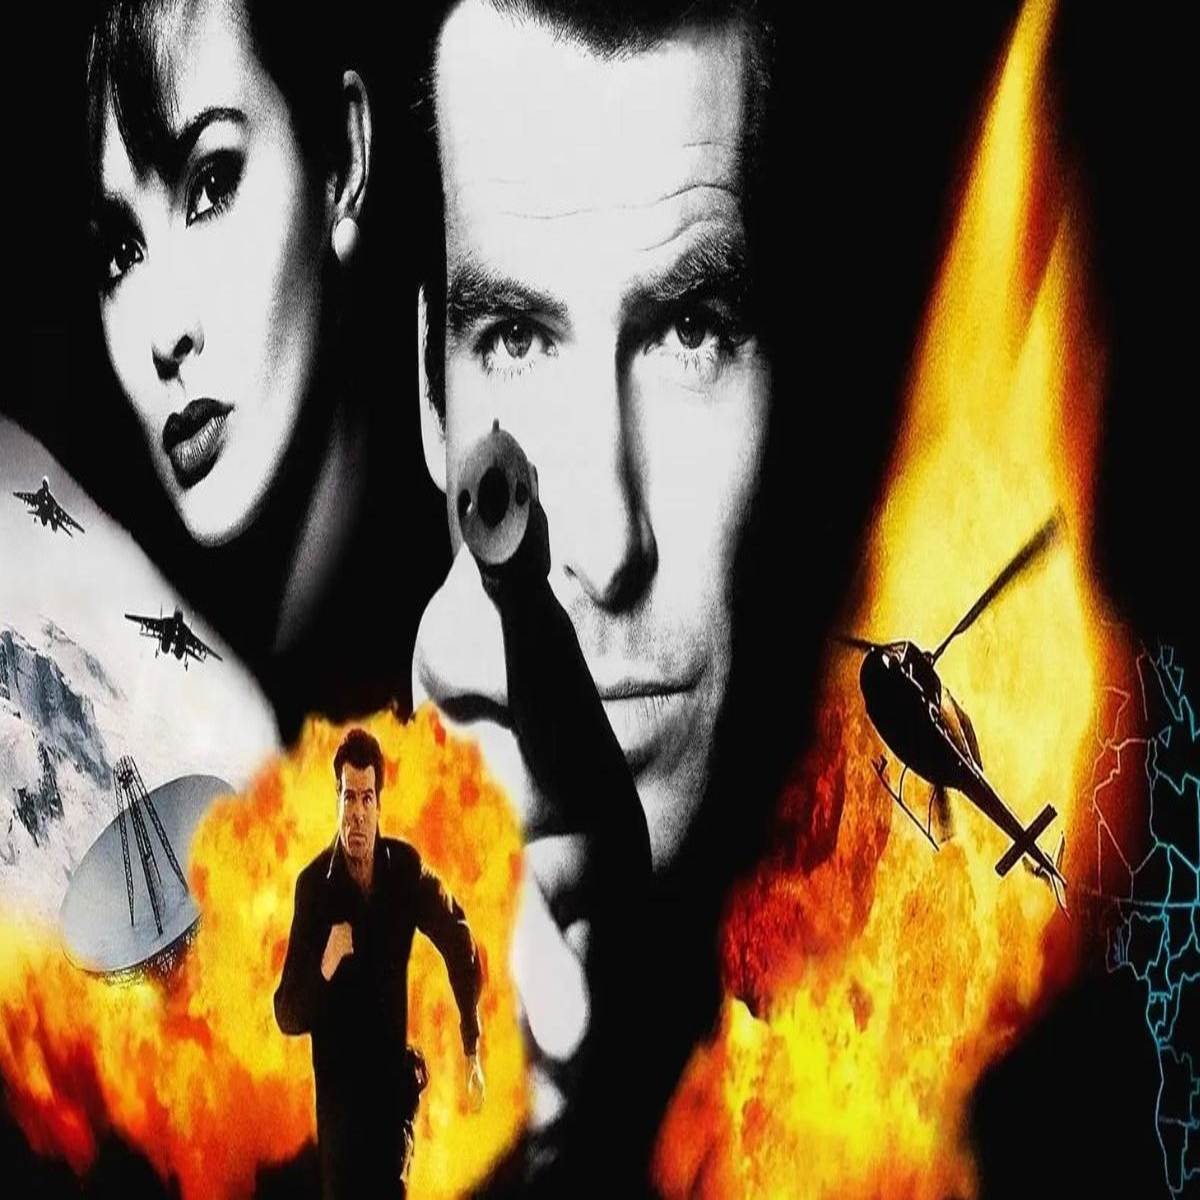 goldeneye 007 News, Reviews and Information